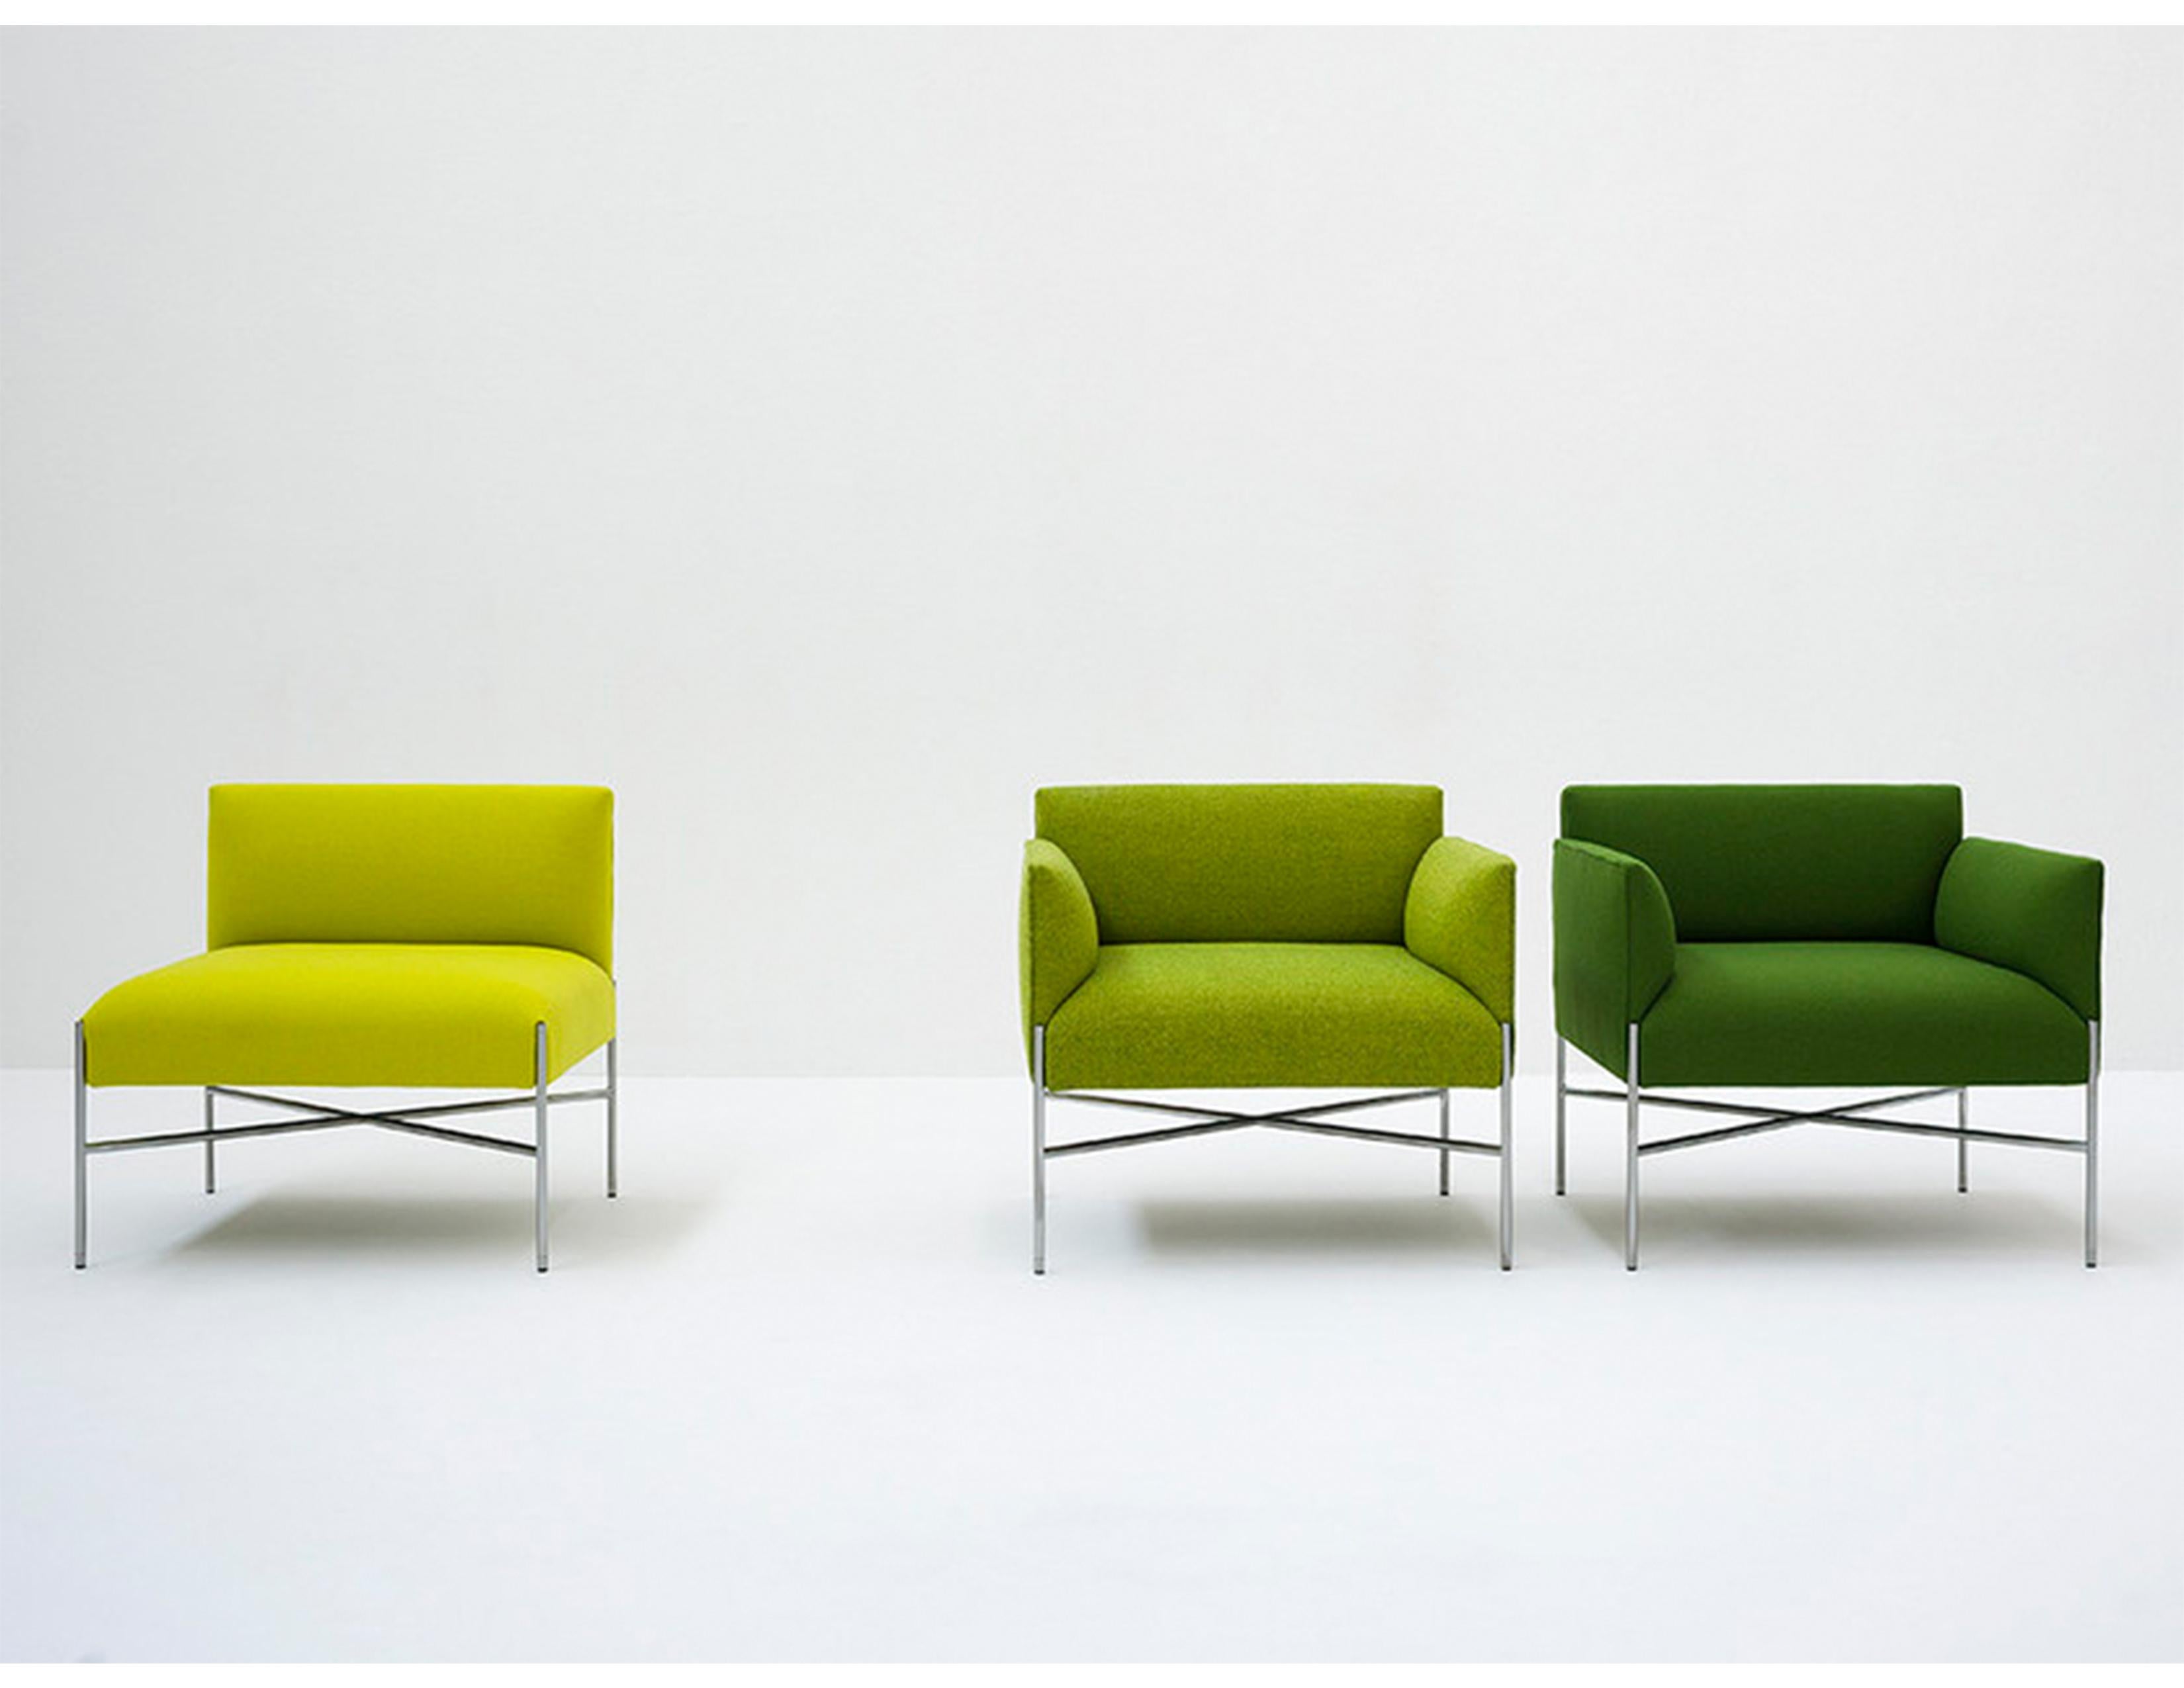 Chill-out is a system of sofas and armchairs that can stand alone or create a vast range of different linear or corner compositions. It features a light, slim base and cozy, comfortable cushioning, to which back and armrests can be added. An ideal